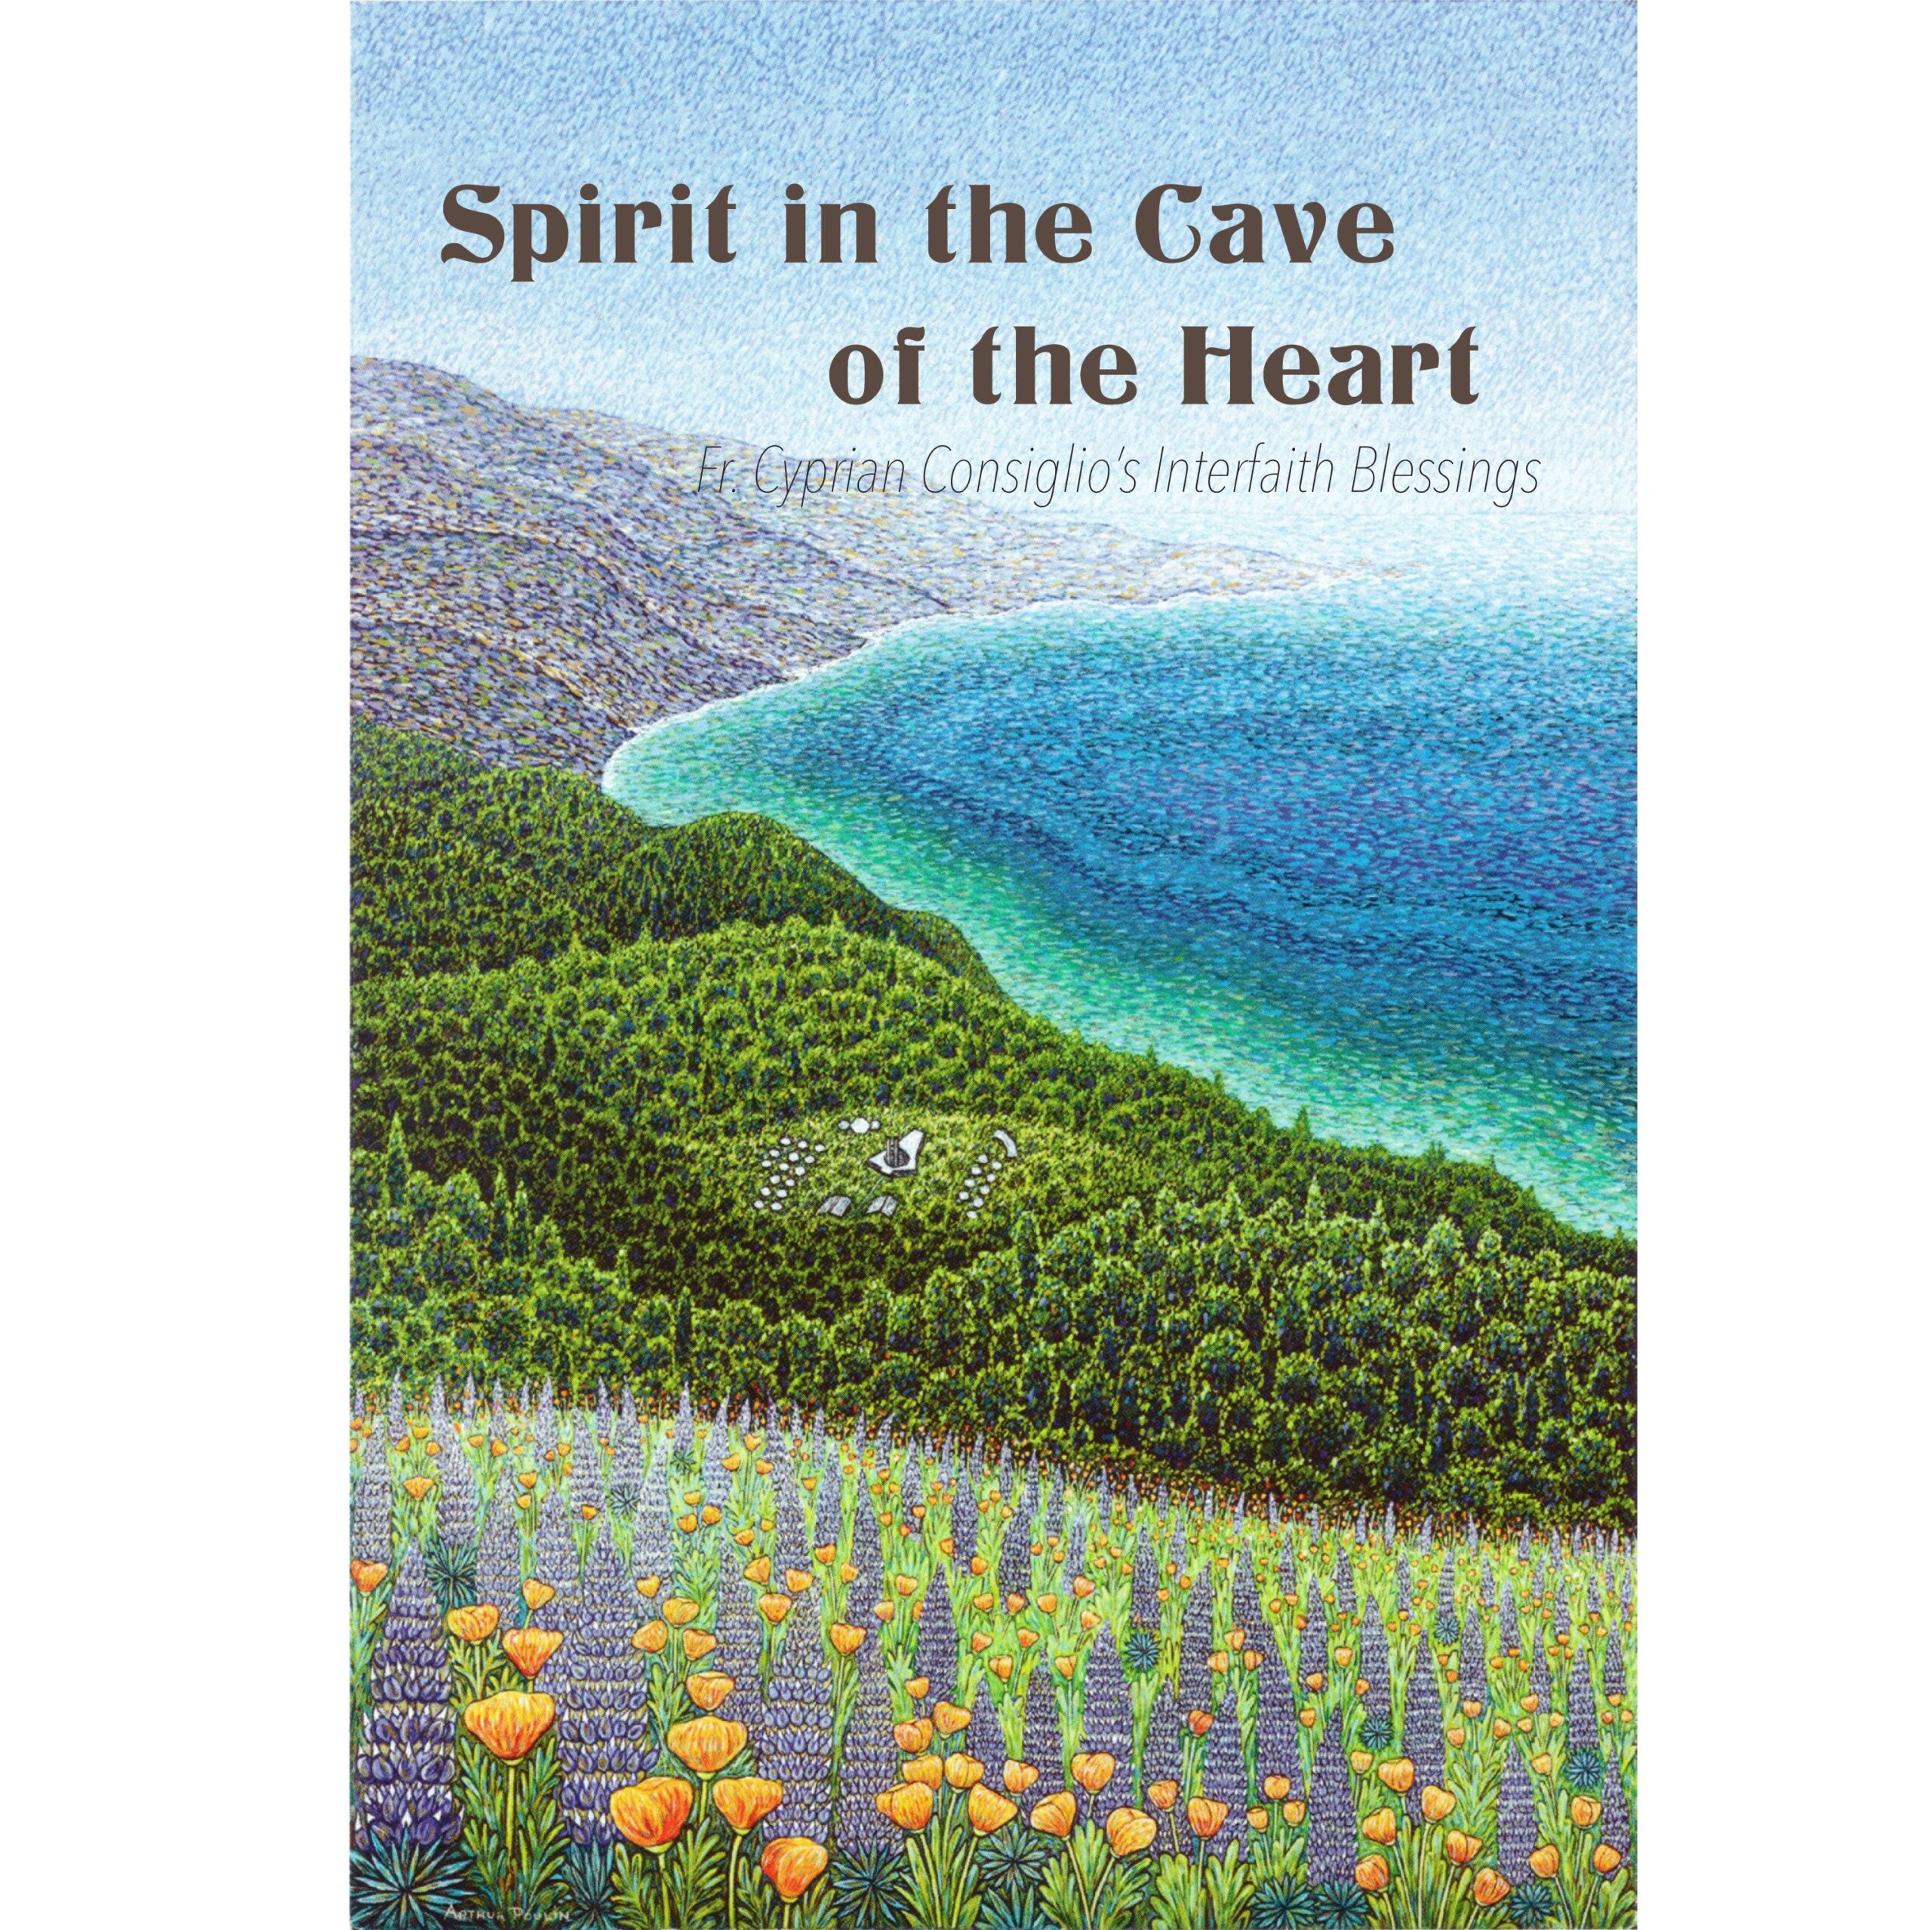 Download Spirit in the Cave of the Heart